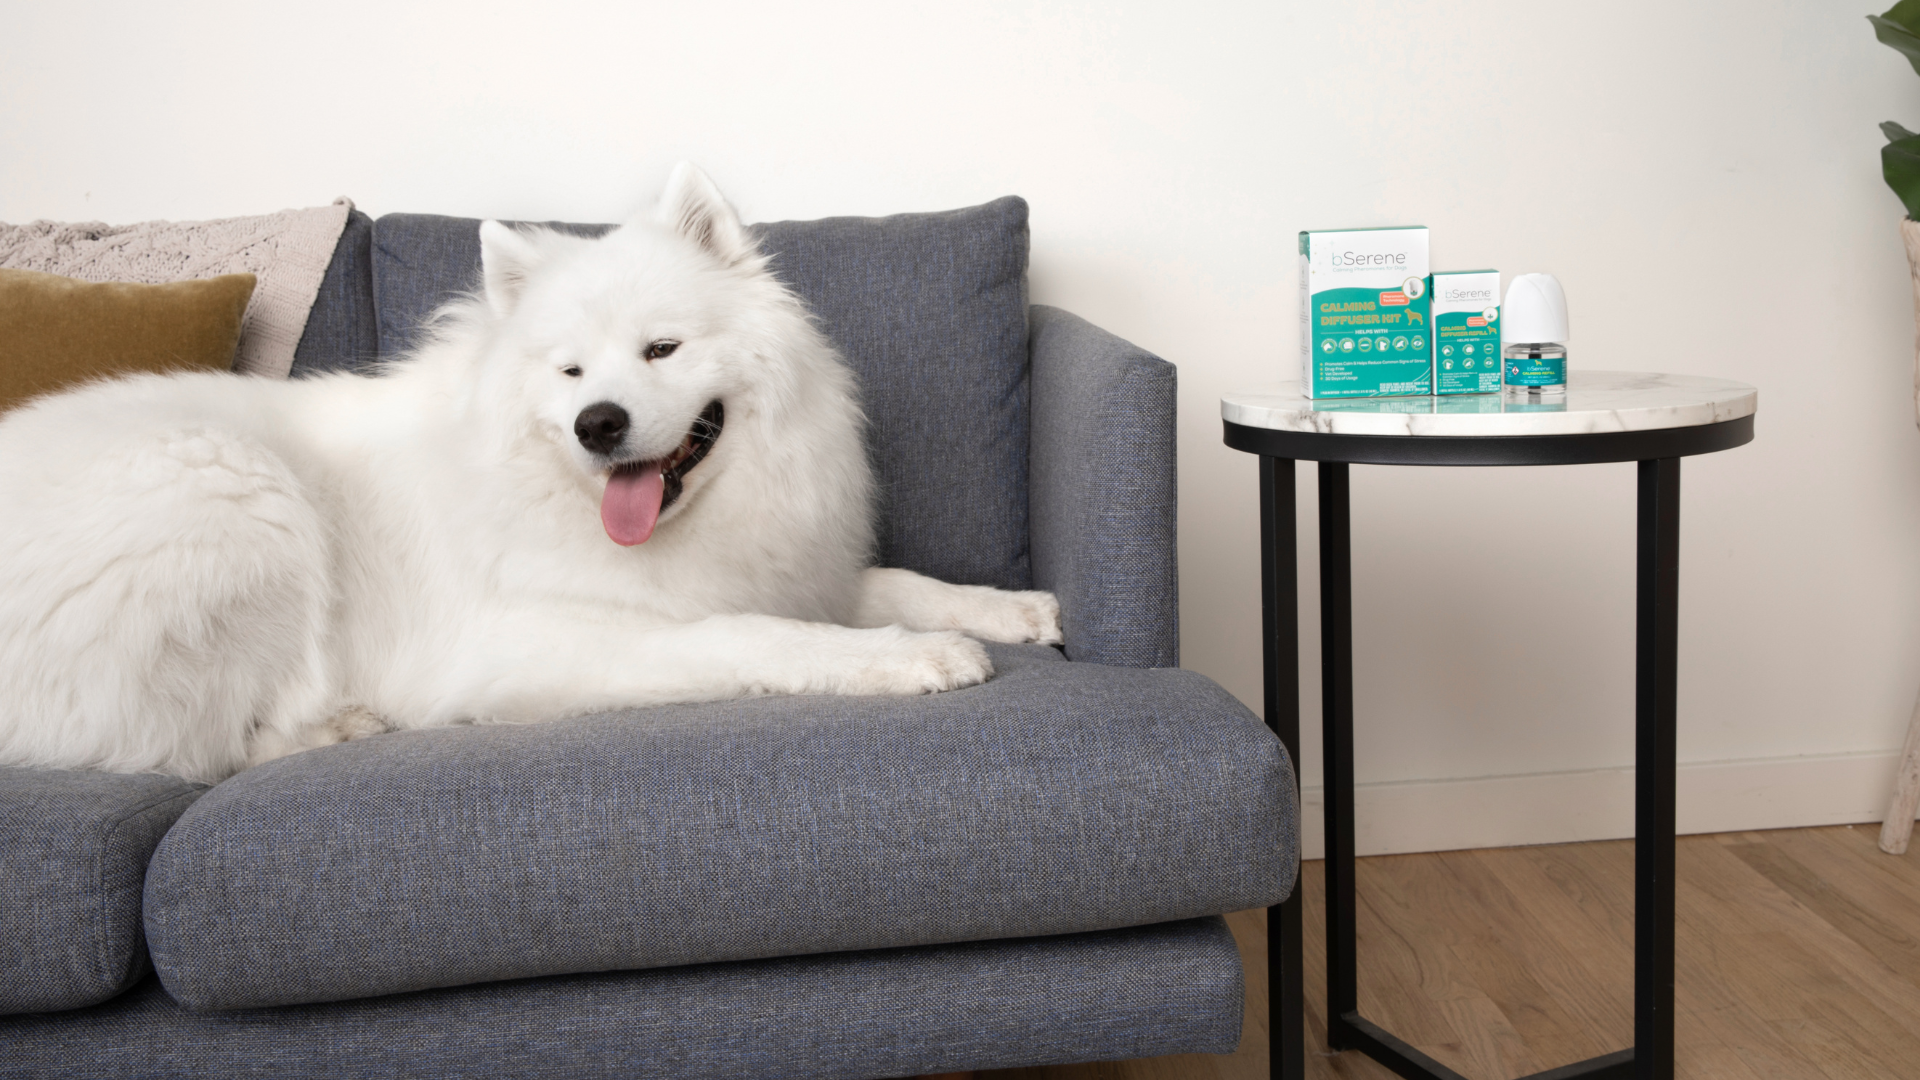 fluffy dog sitting on a couch near bserene calming products